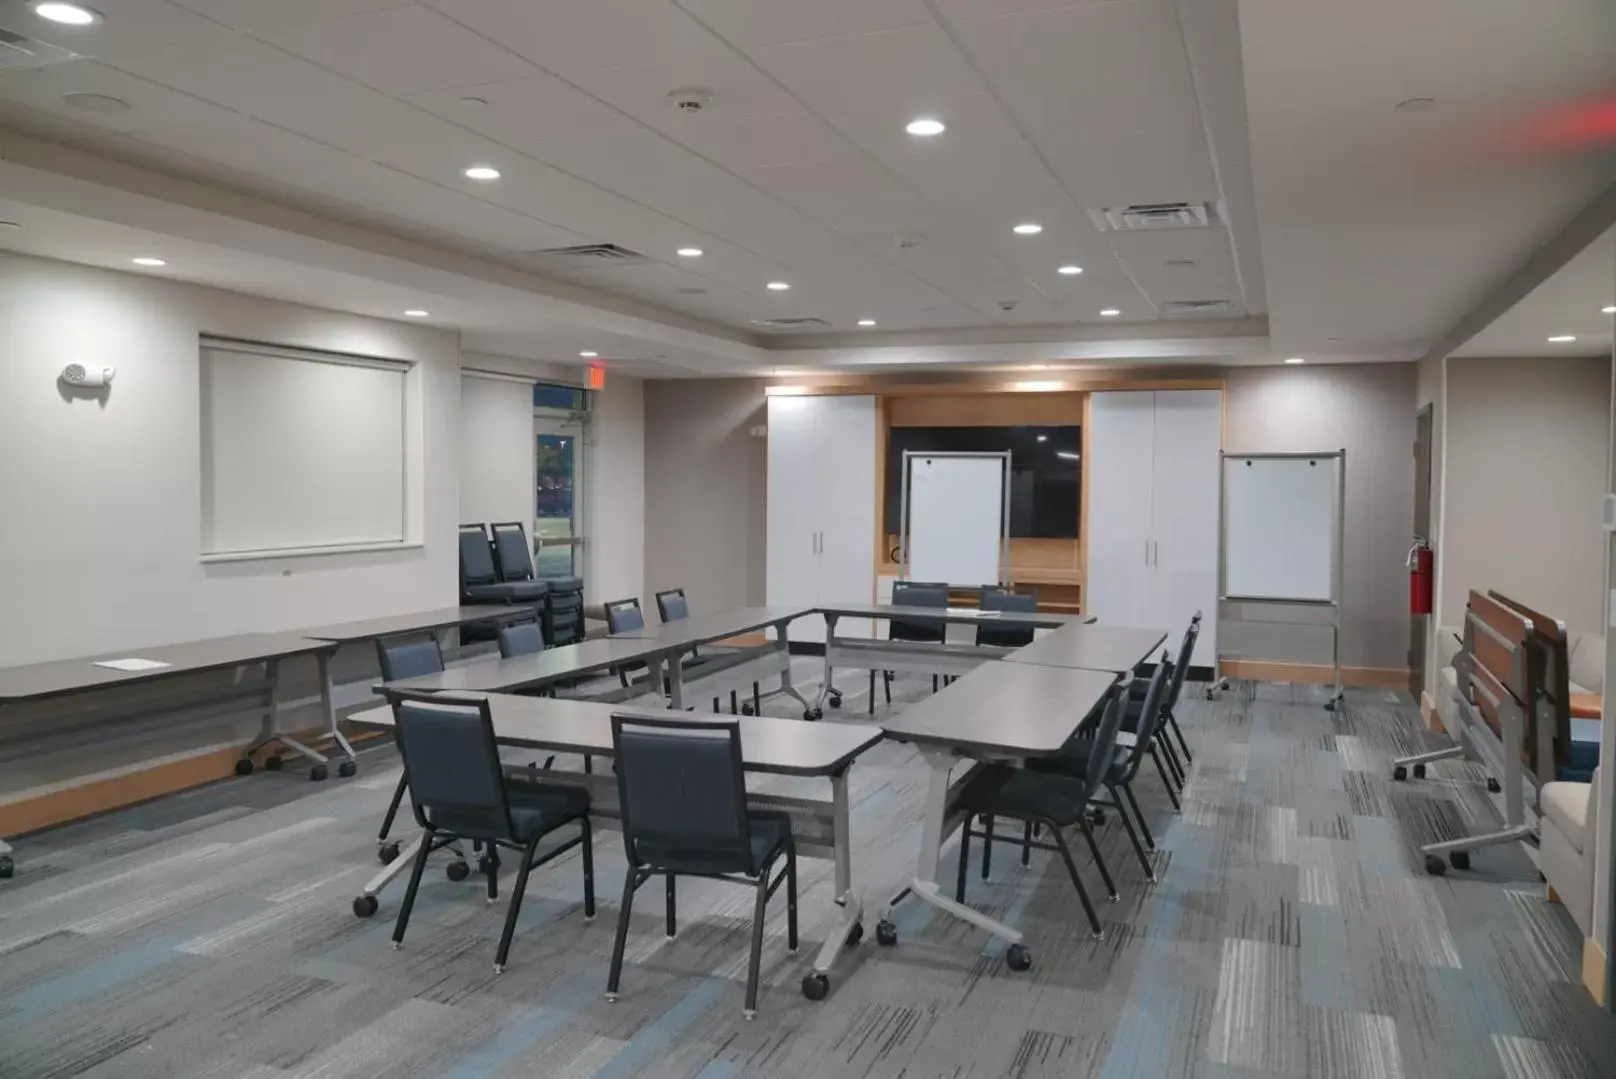 Business facilities in Hyatt House Bryan/College Station